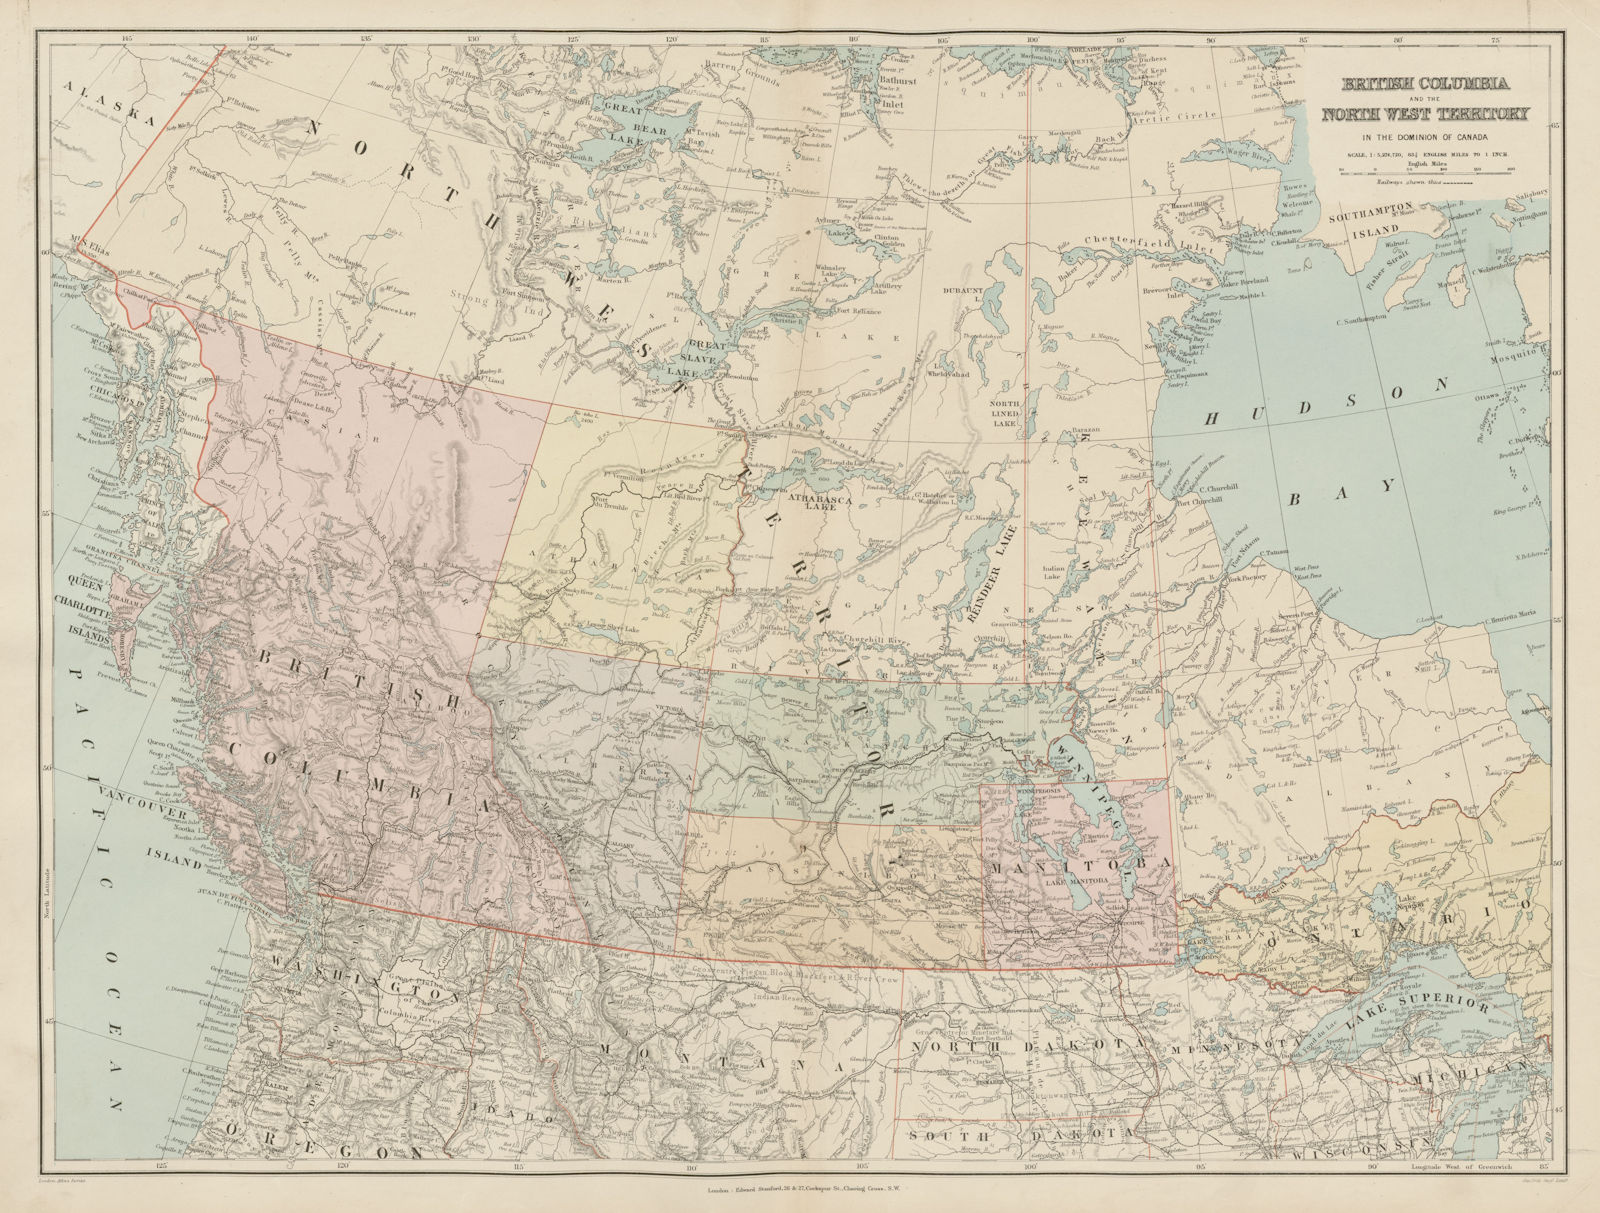 Associate Product British Columbia & Northwest Territory. Manitoba Canada. STANFORD 1896 old map